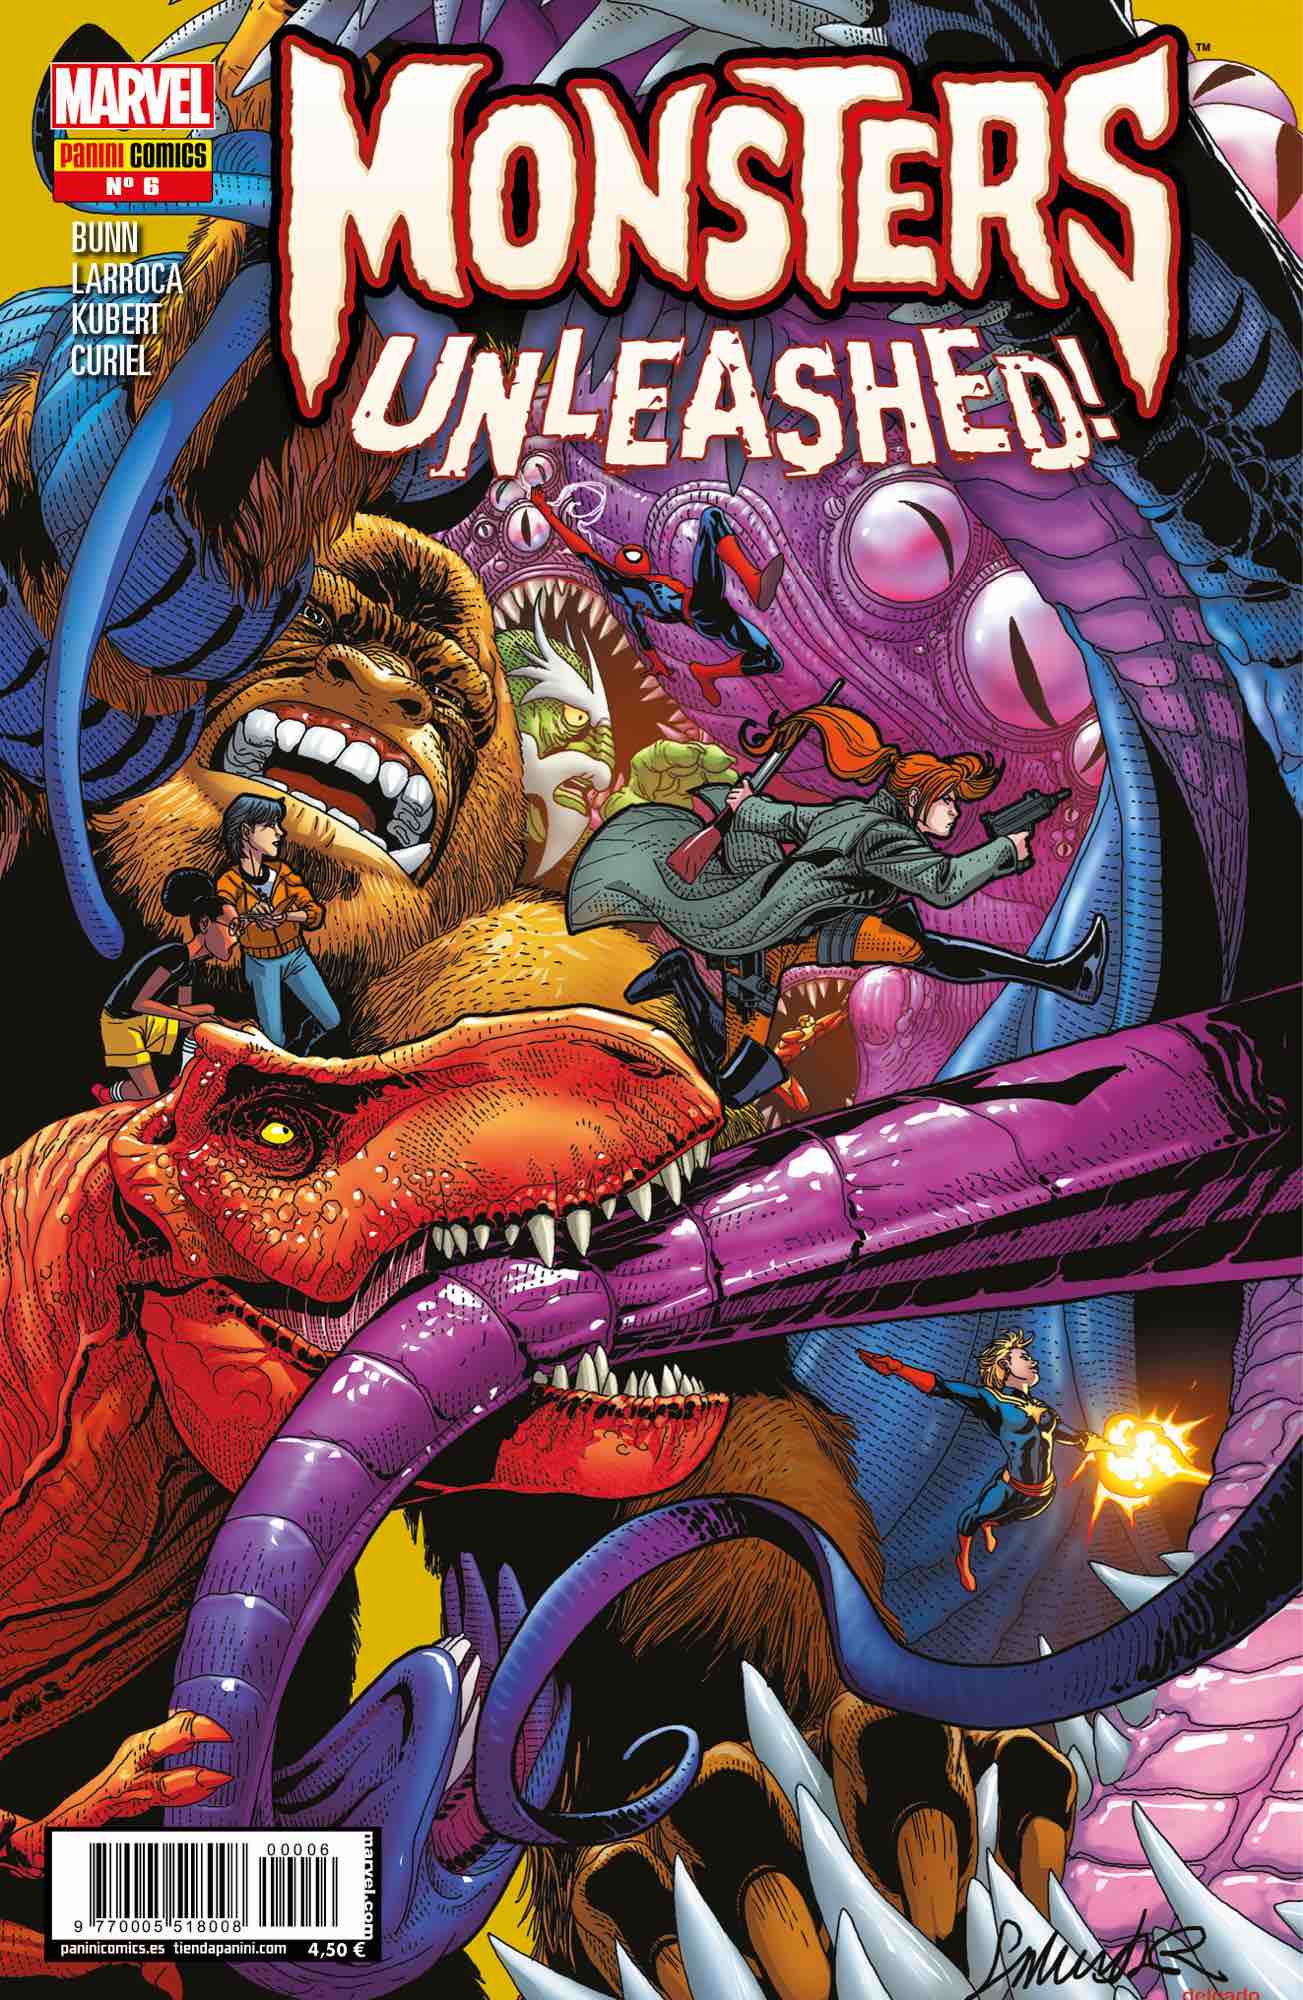 MONSTERS UNLEASHED! 06